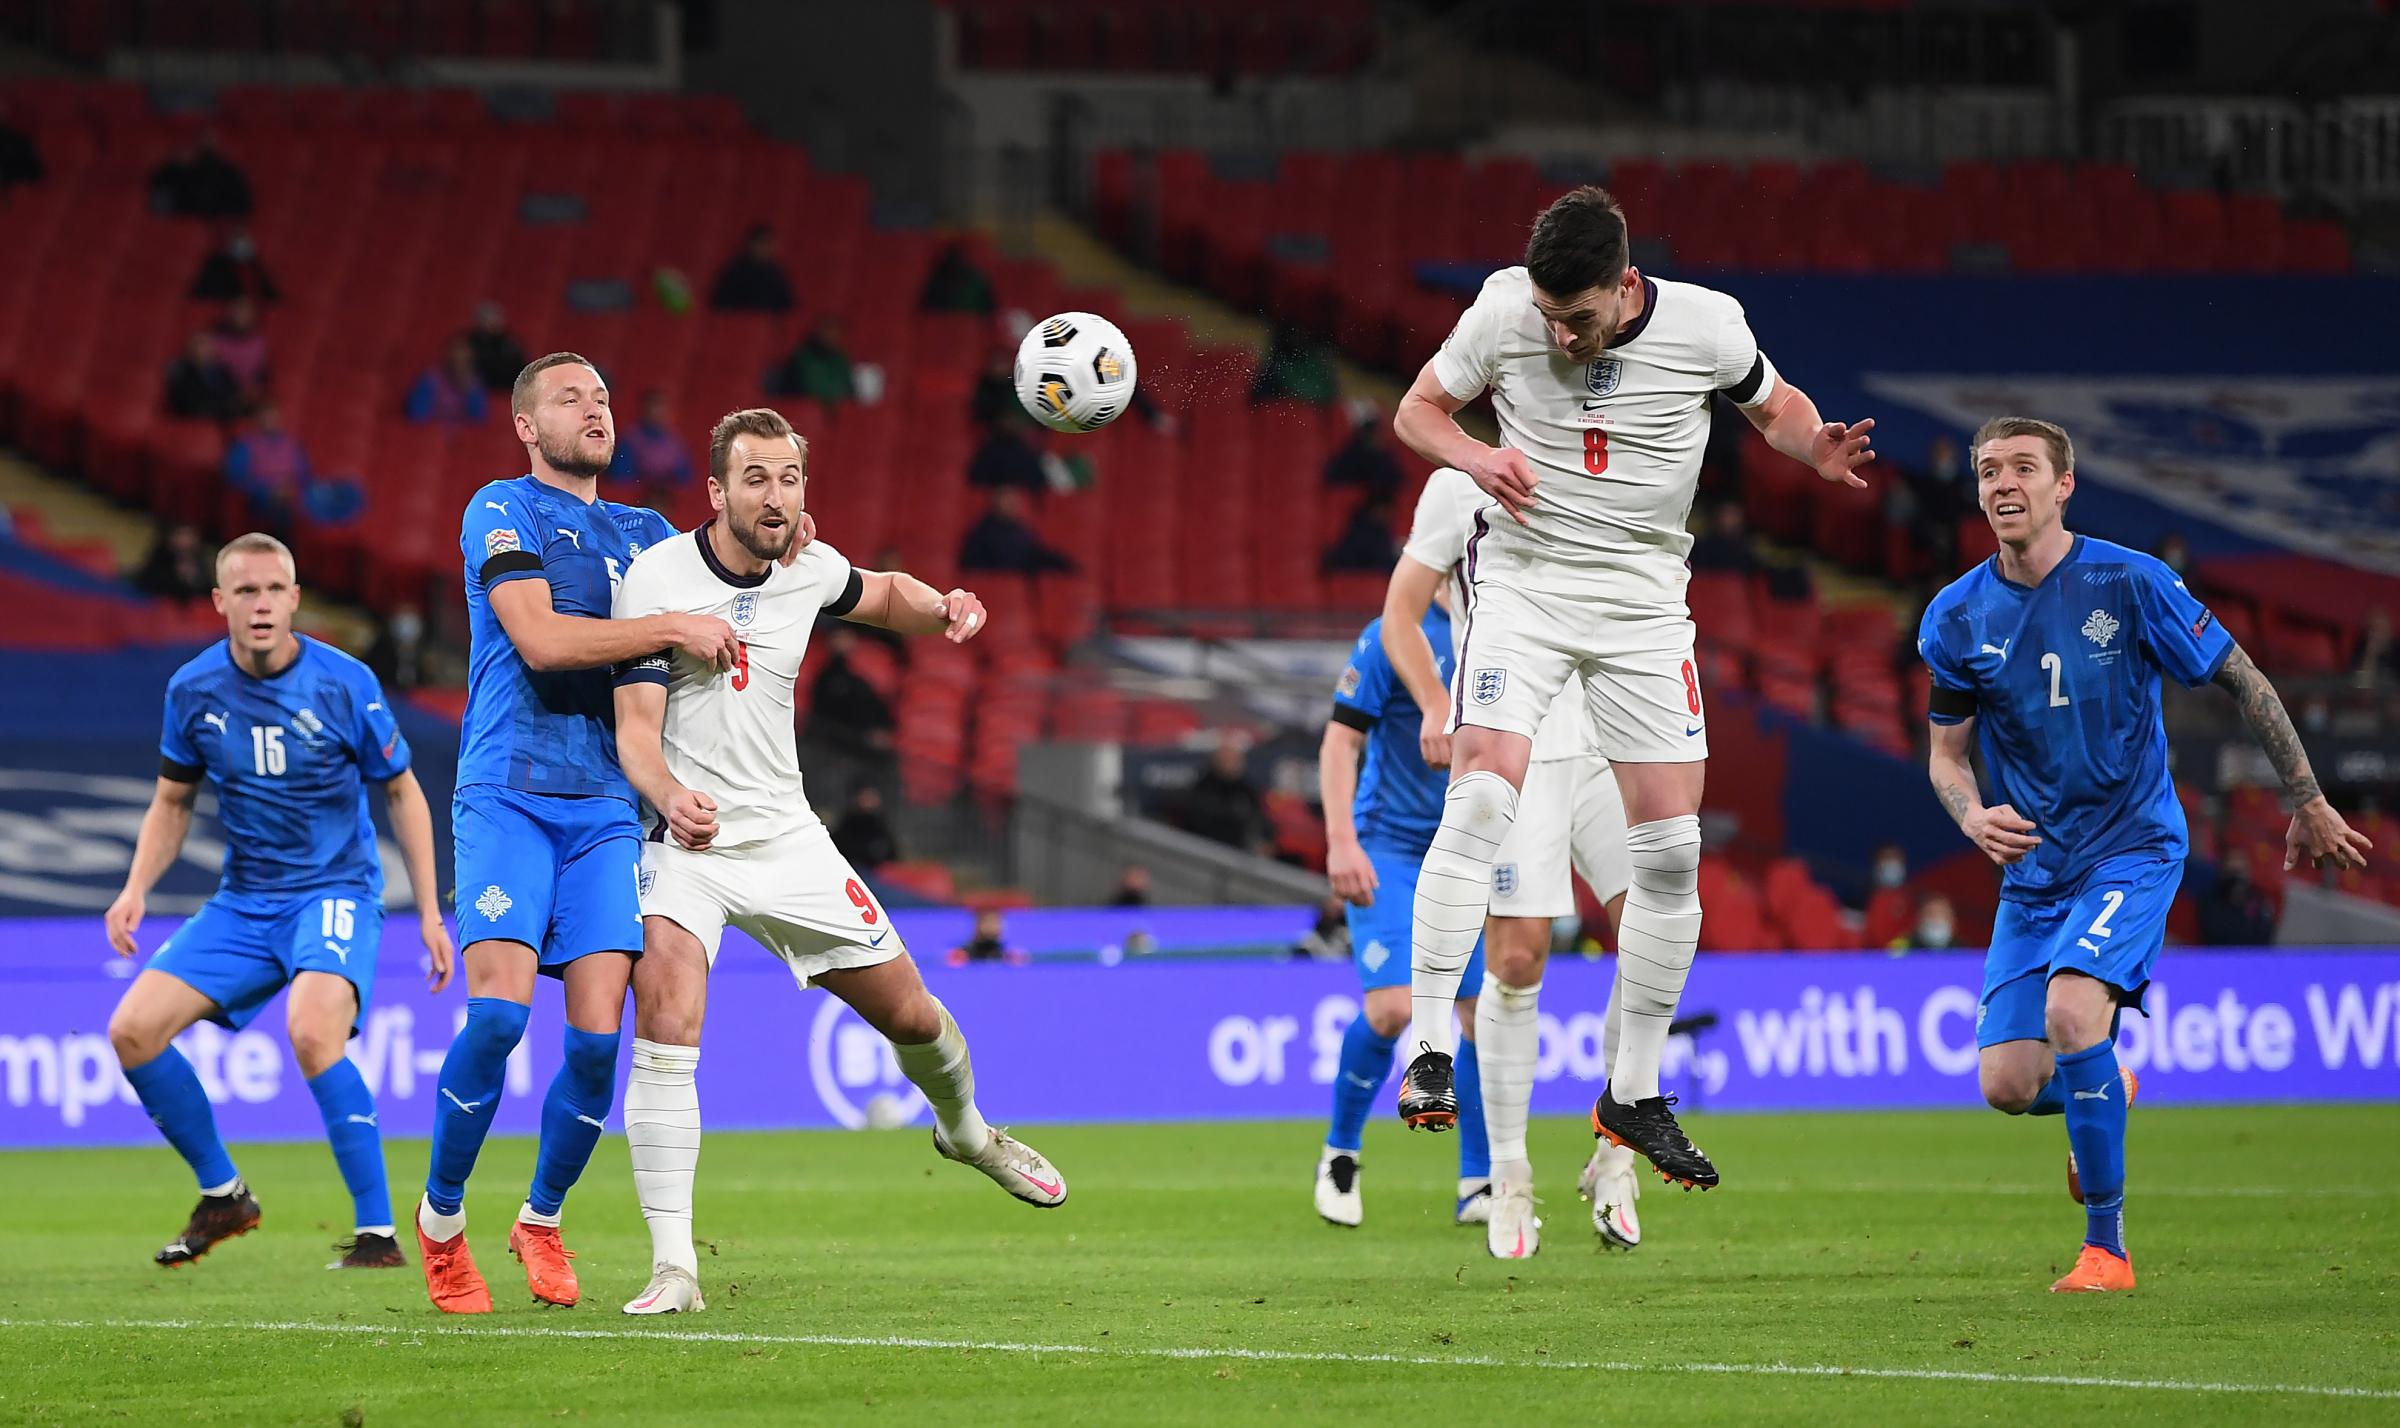 Englands Declan Rice scores his sides first goal of the game during the UEFA Nations League match at Wembley Stadium, London..